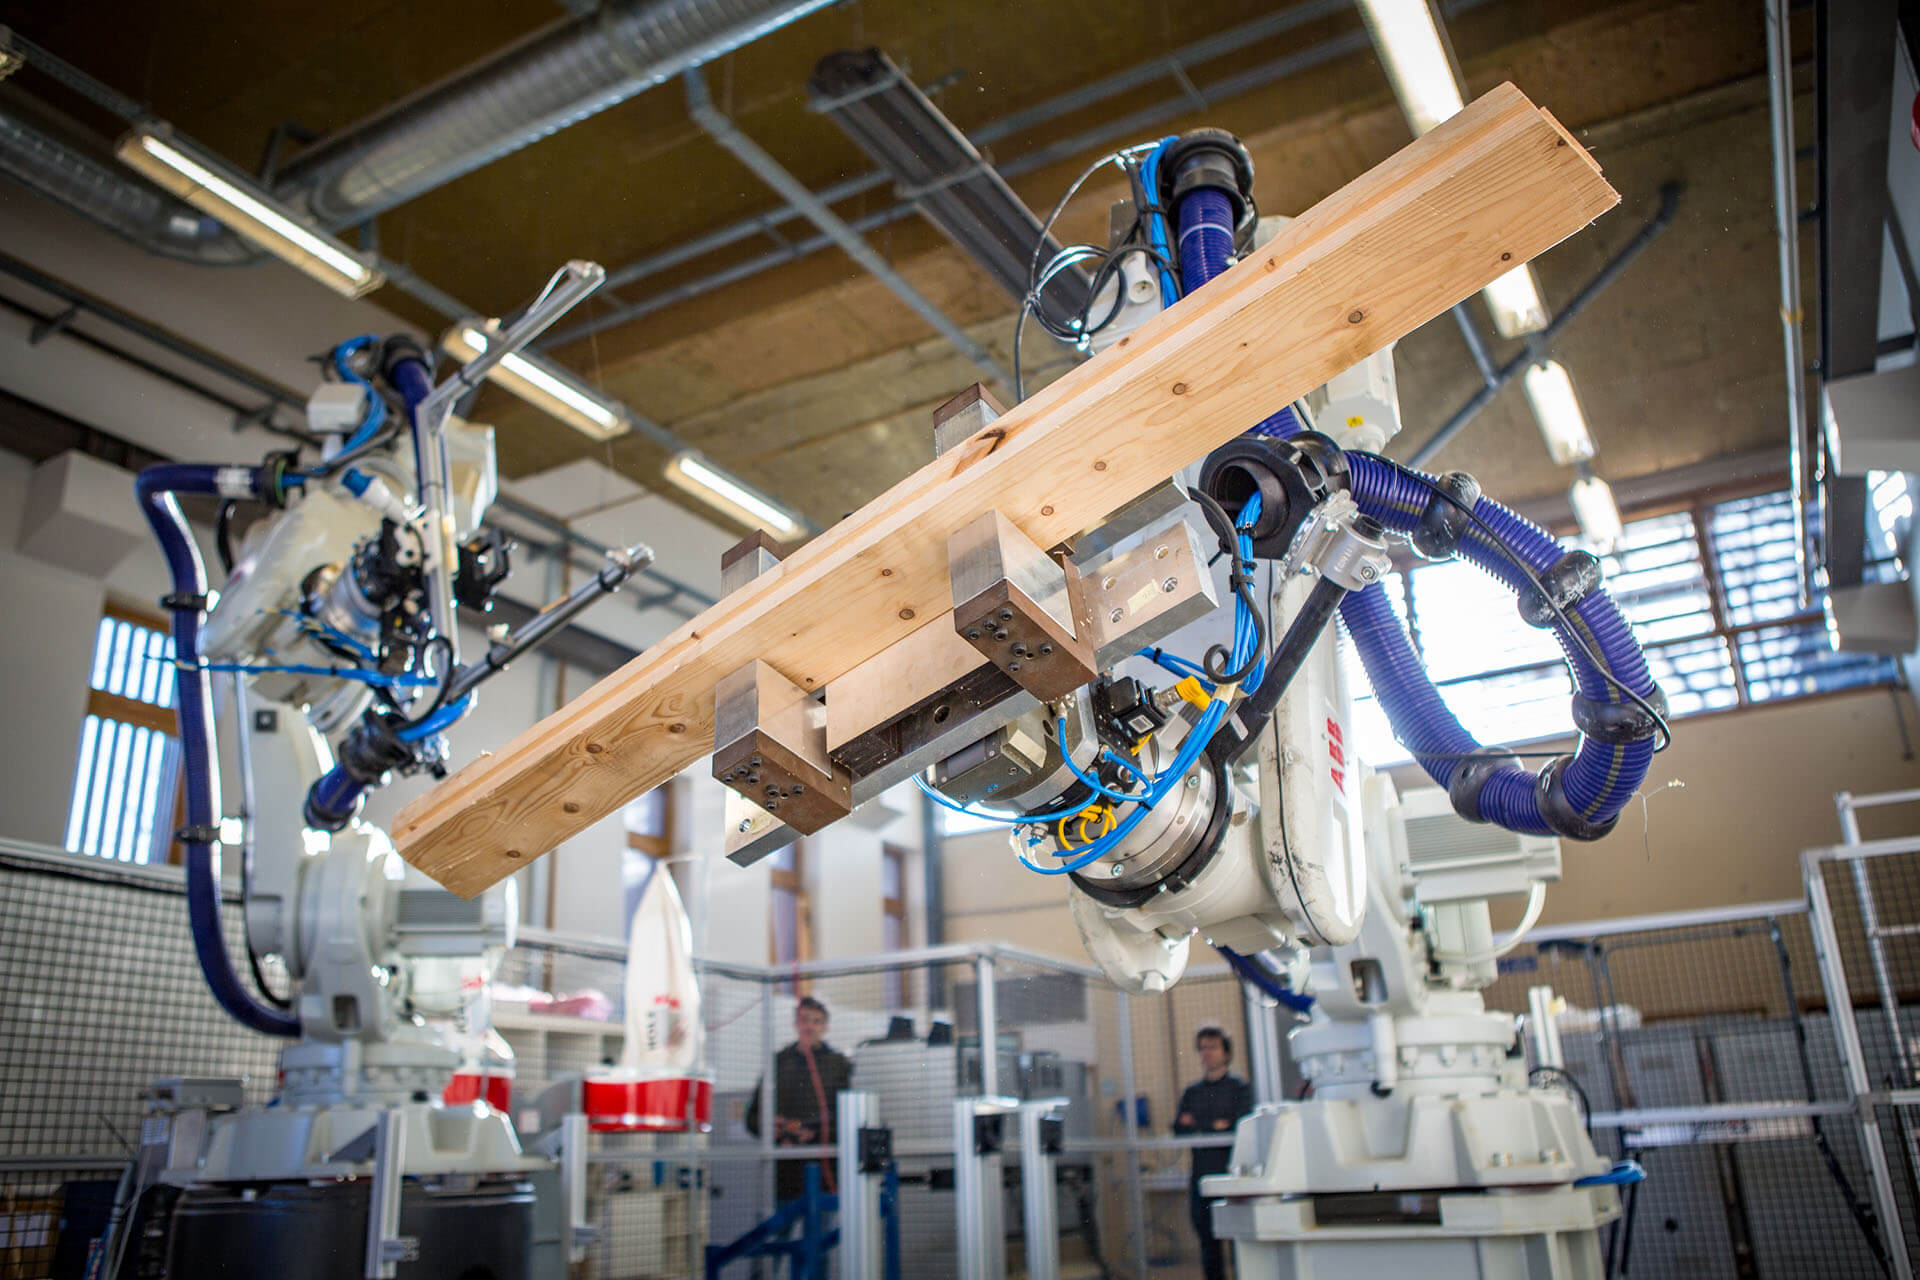 ABB 6620 robots machining timber structure elements